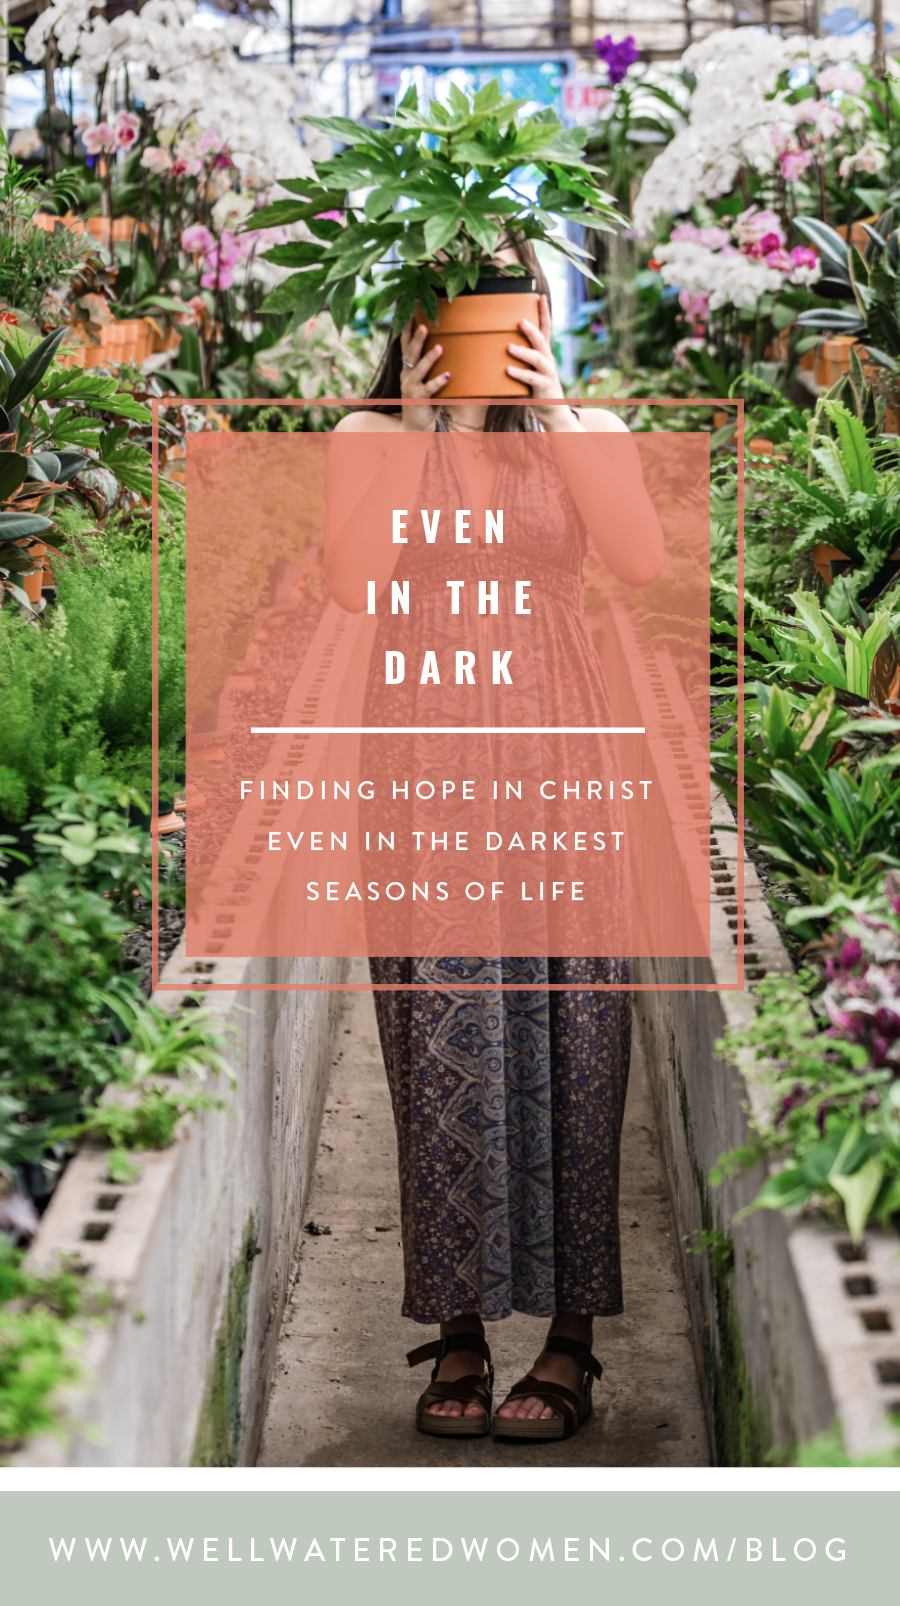 Even in the Dark: Finding Hope in Christ Even in the Darkest Seasons of Life